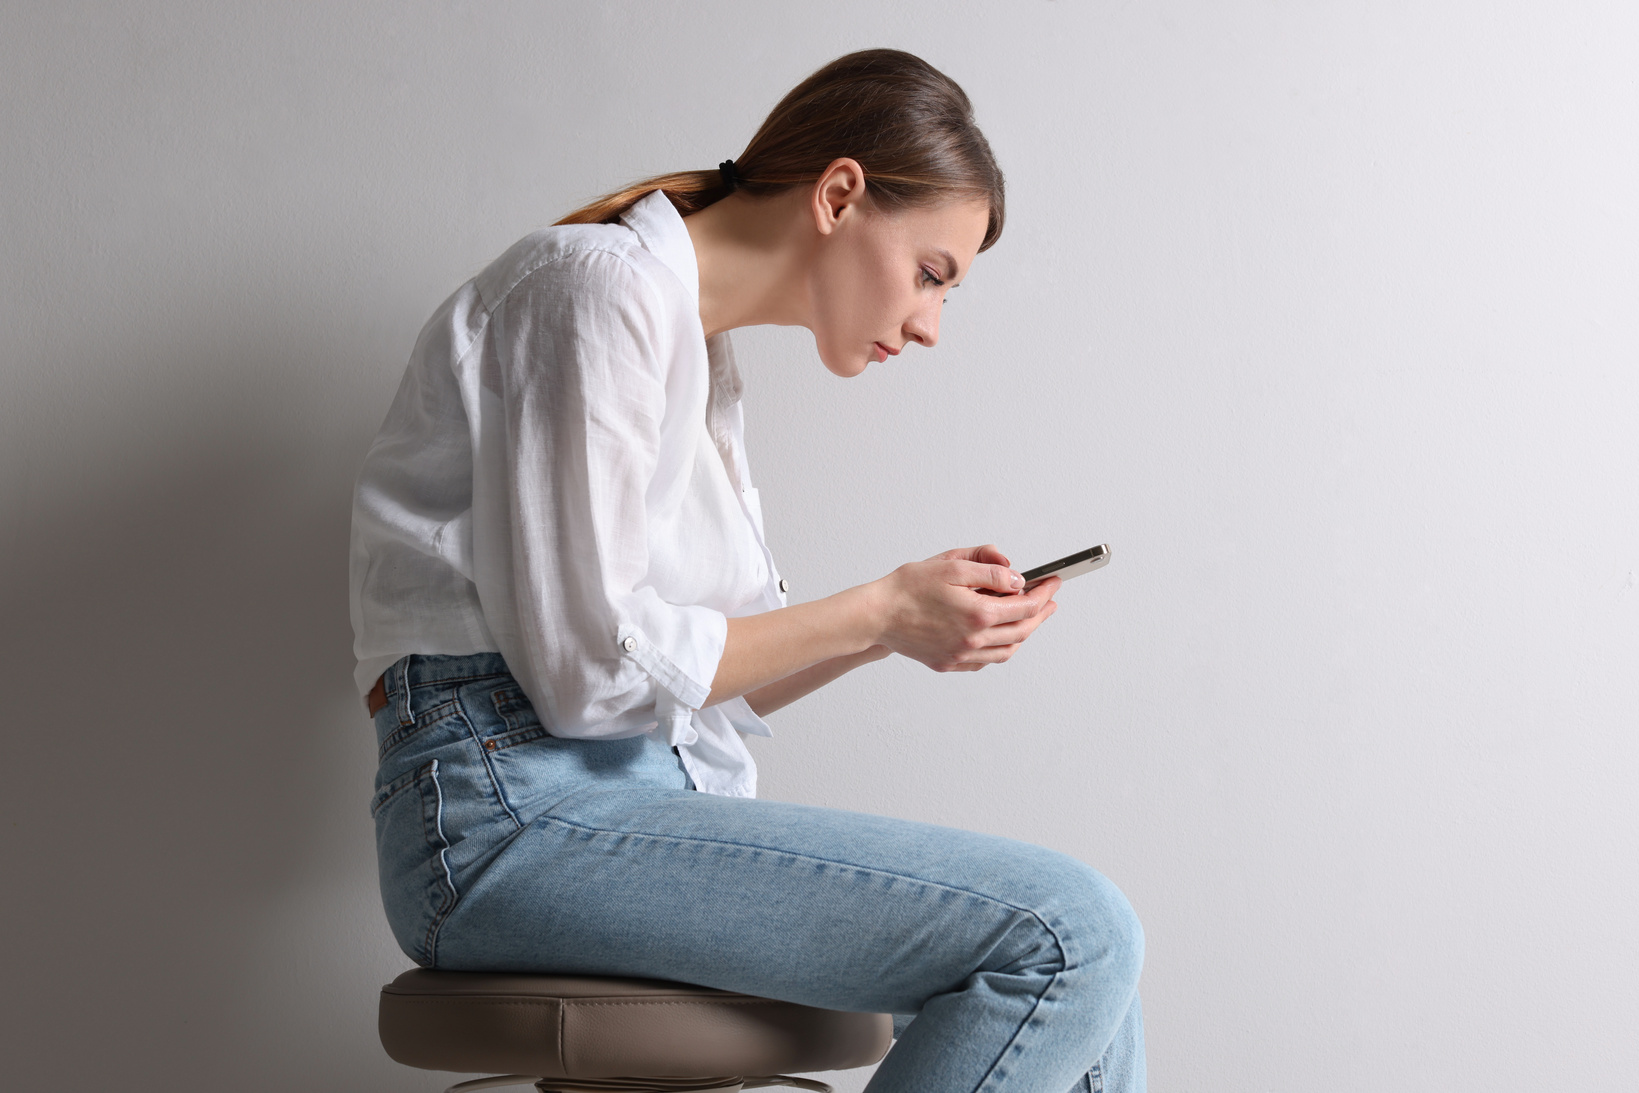 Woman with Bad Posture Using Smartphone While Sitting on Stool a